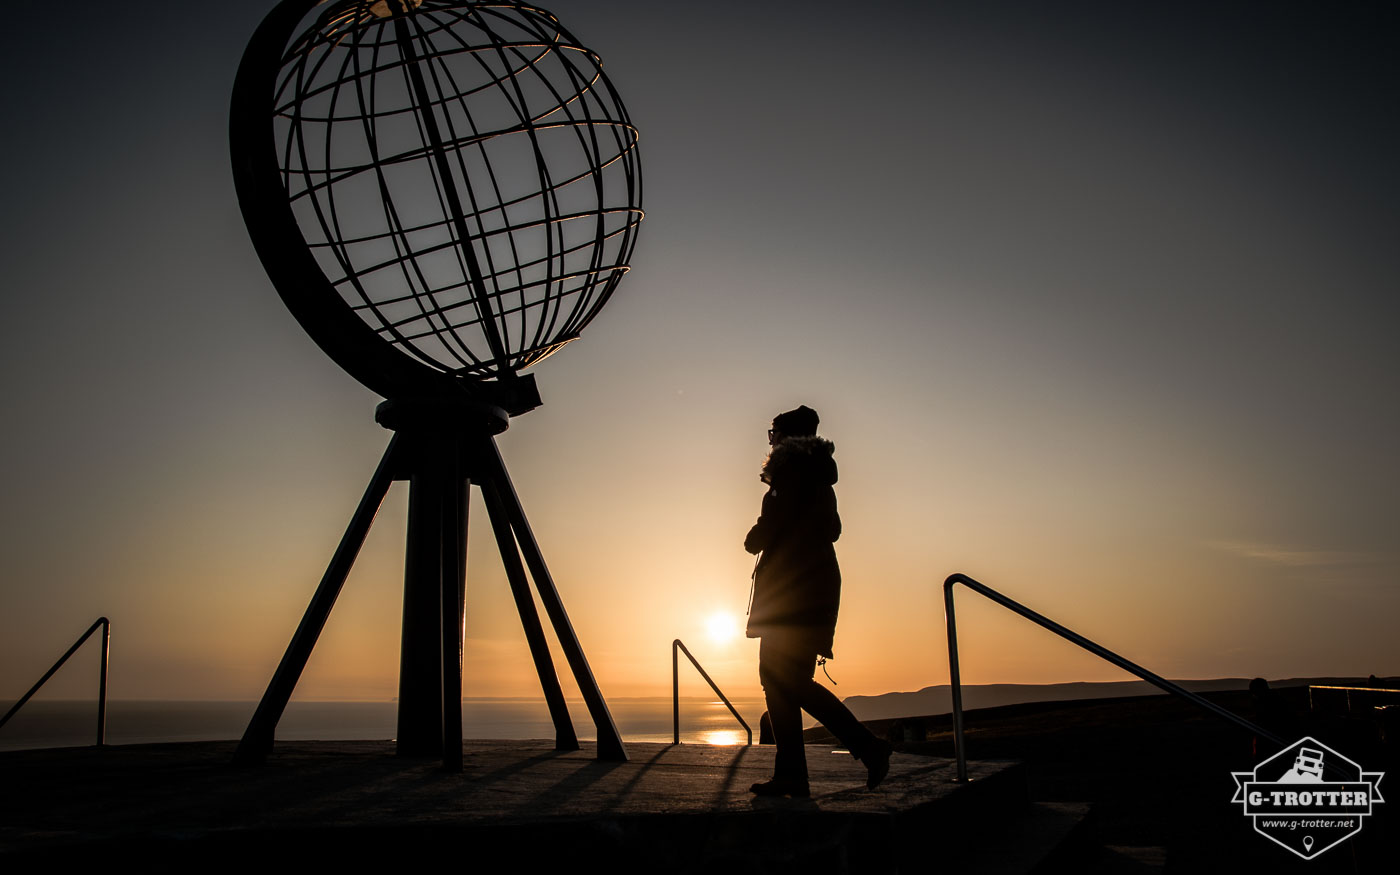 Watching the sunrise at the North Cape was an unforgettable experience.